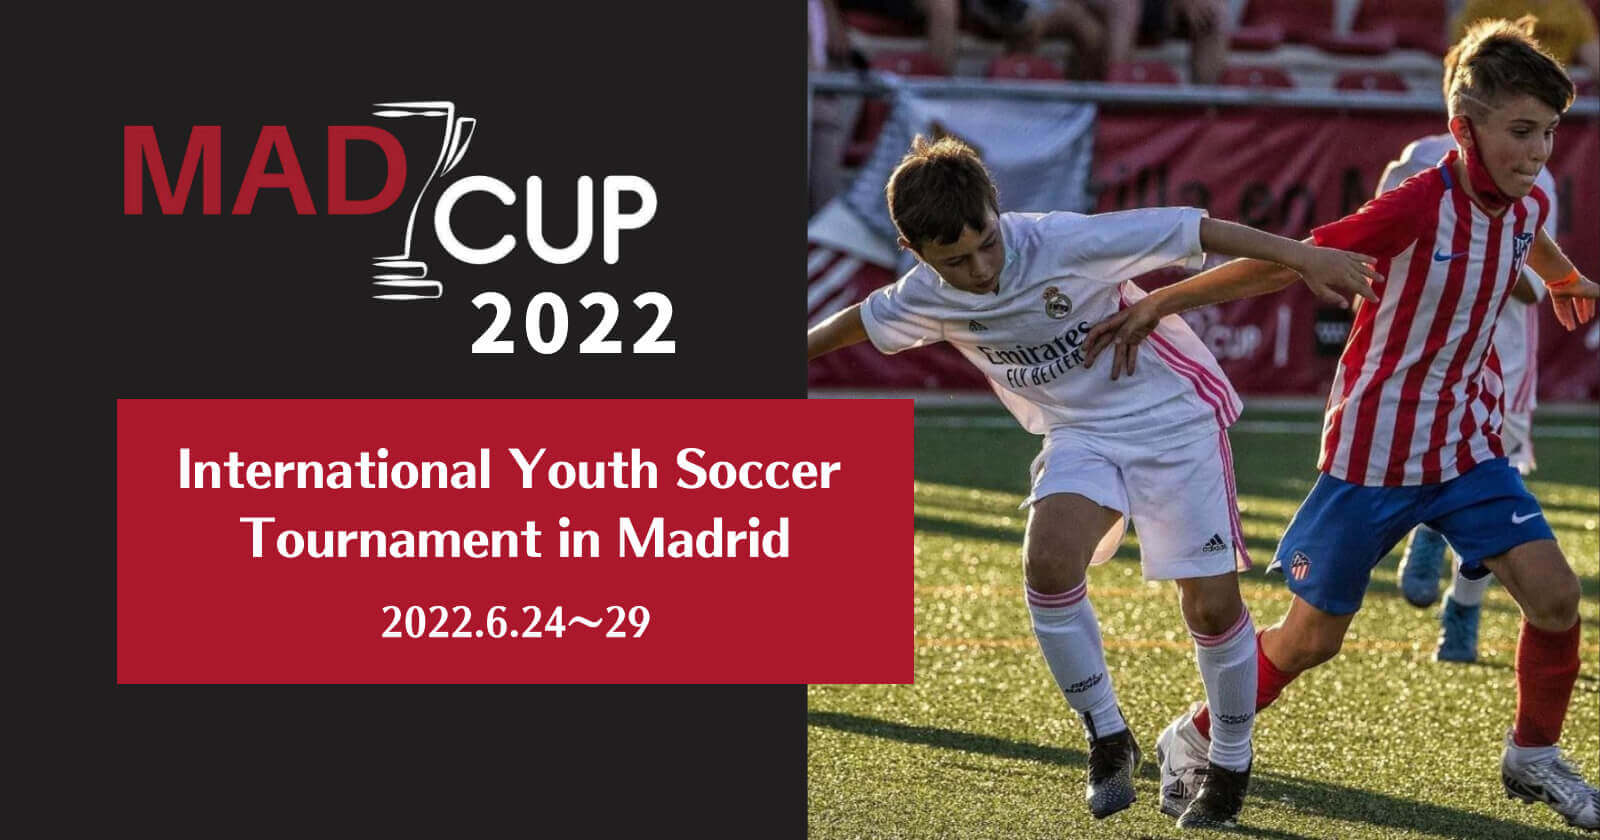 MAD CUP 2022